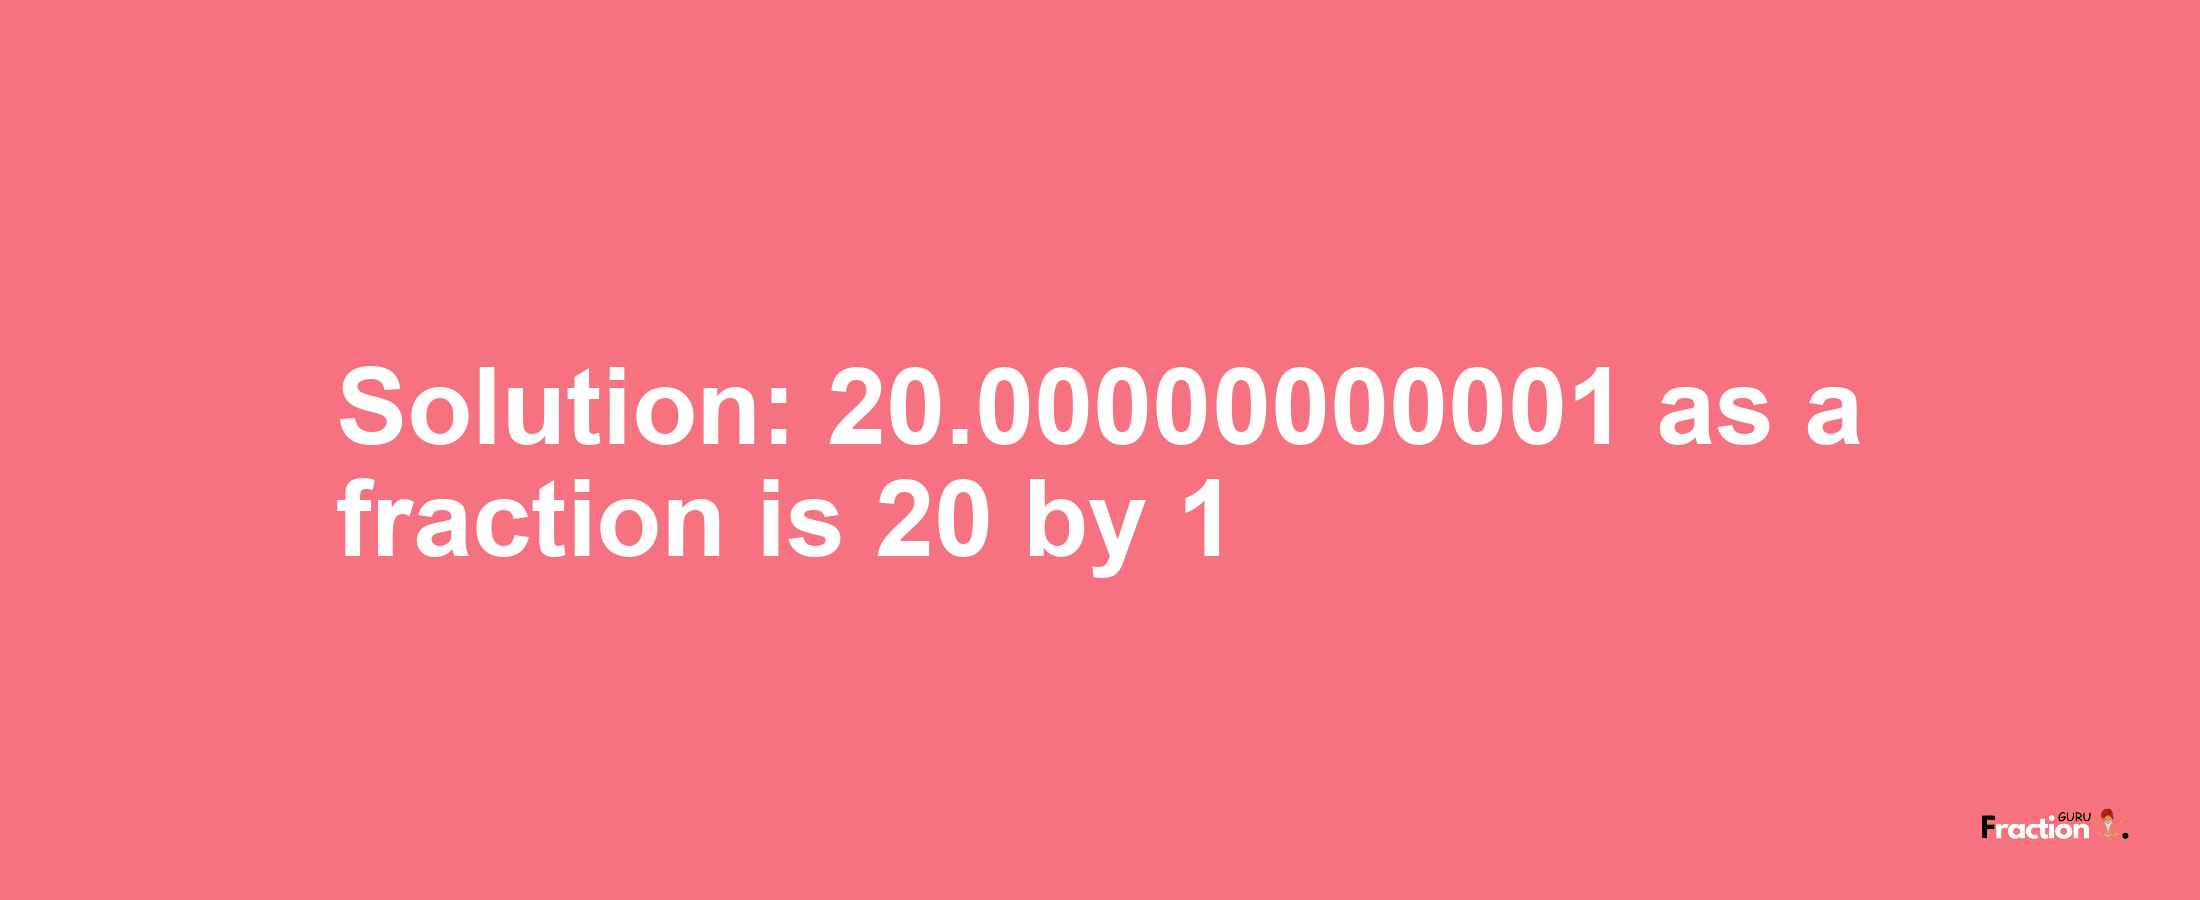 Solution:20.00000000001 as a fraction is 20/1